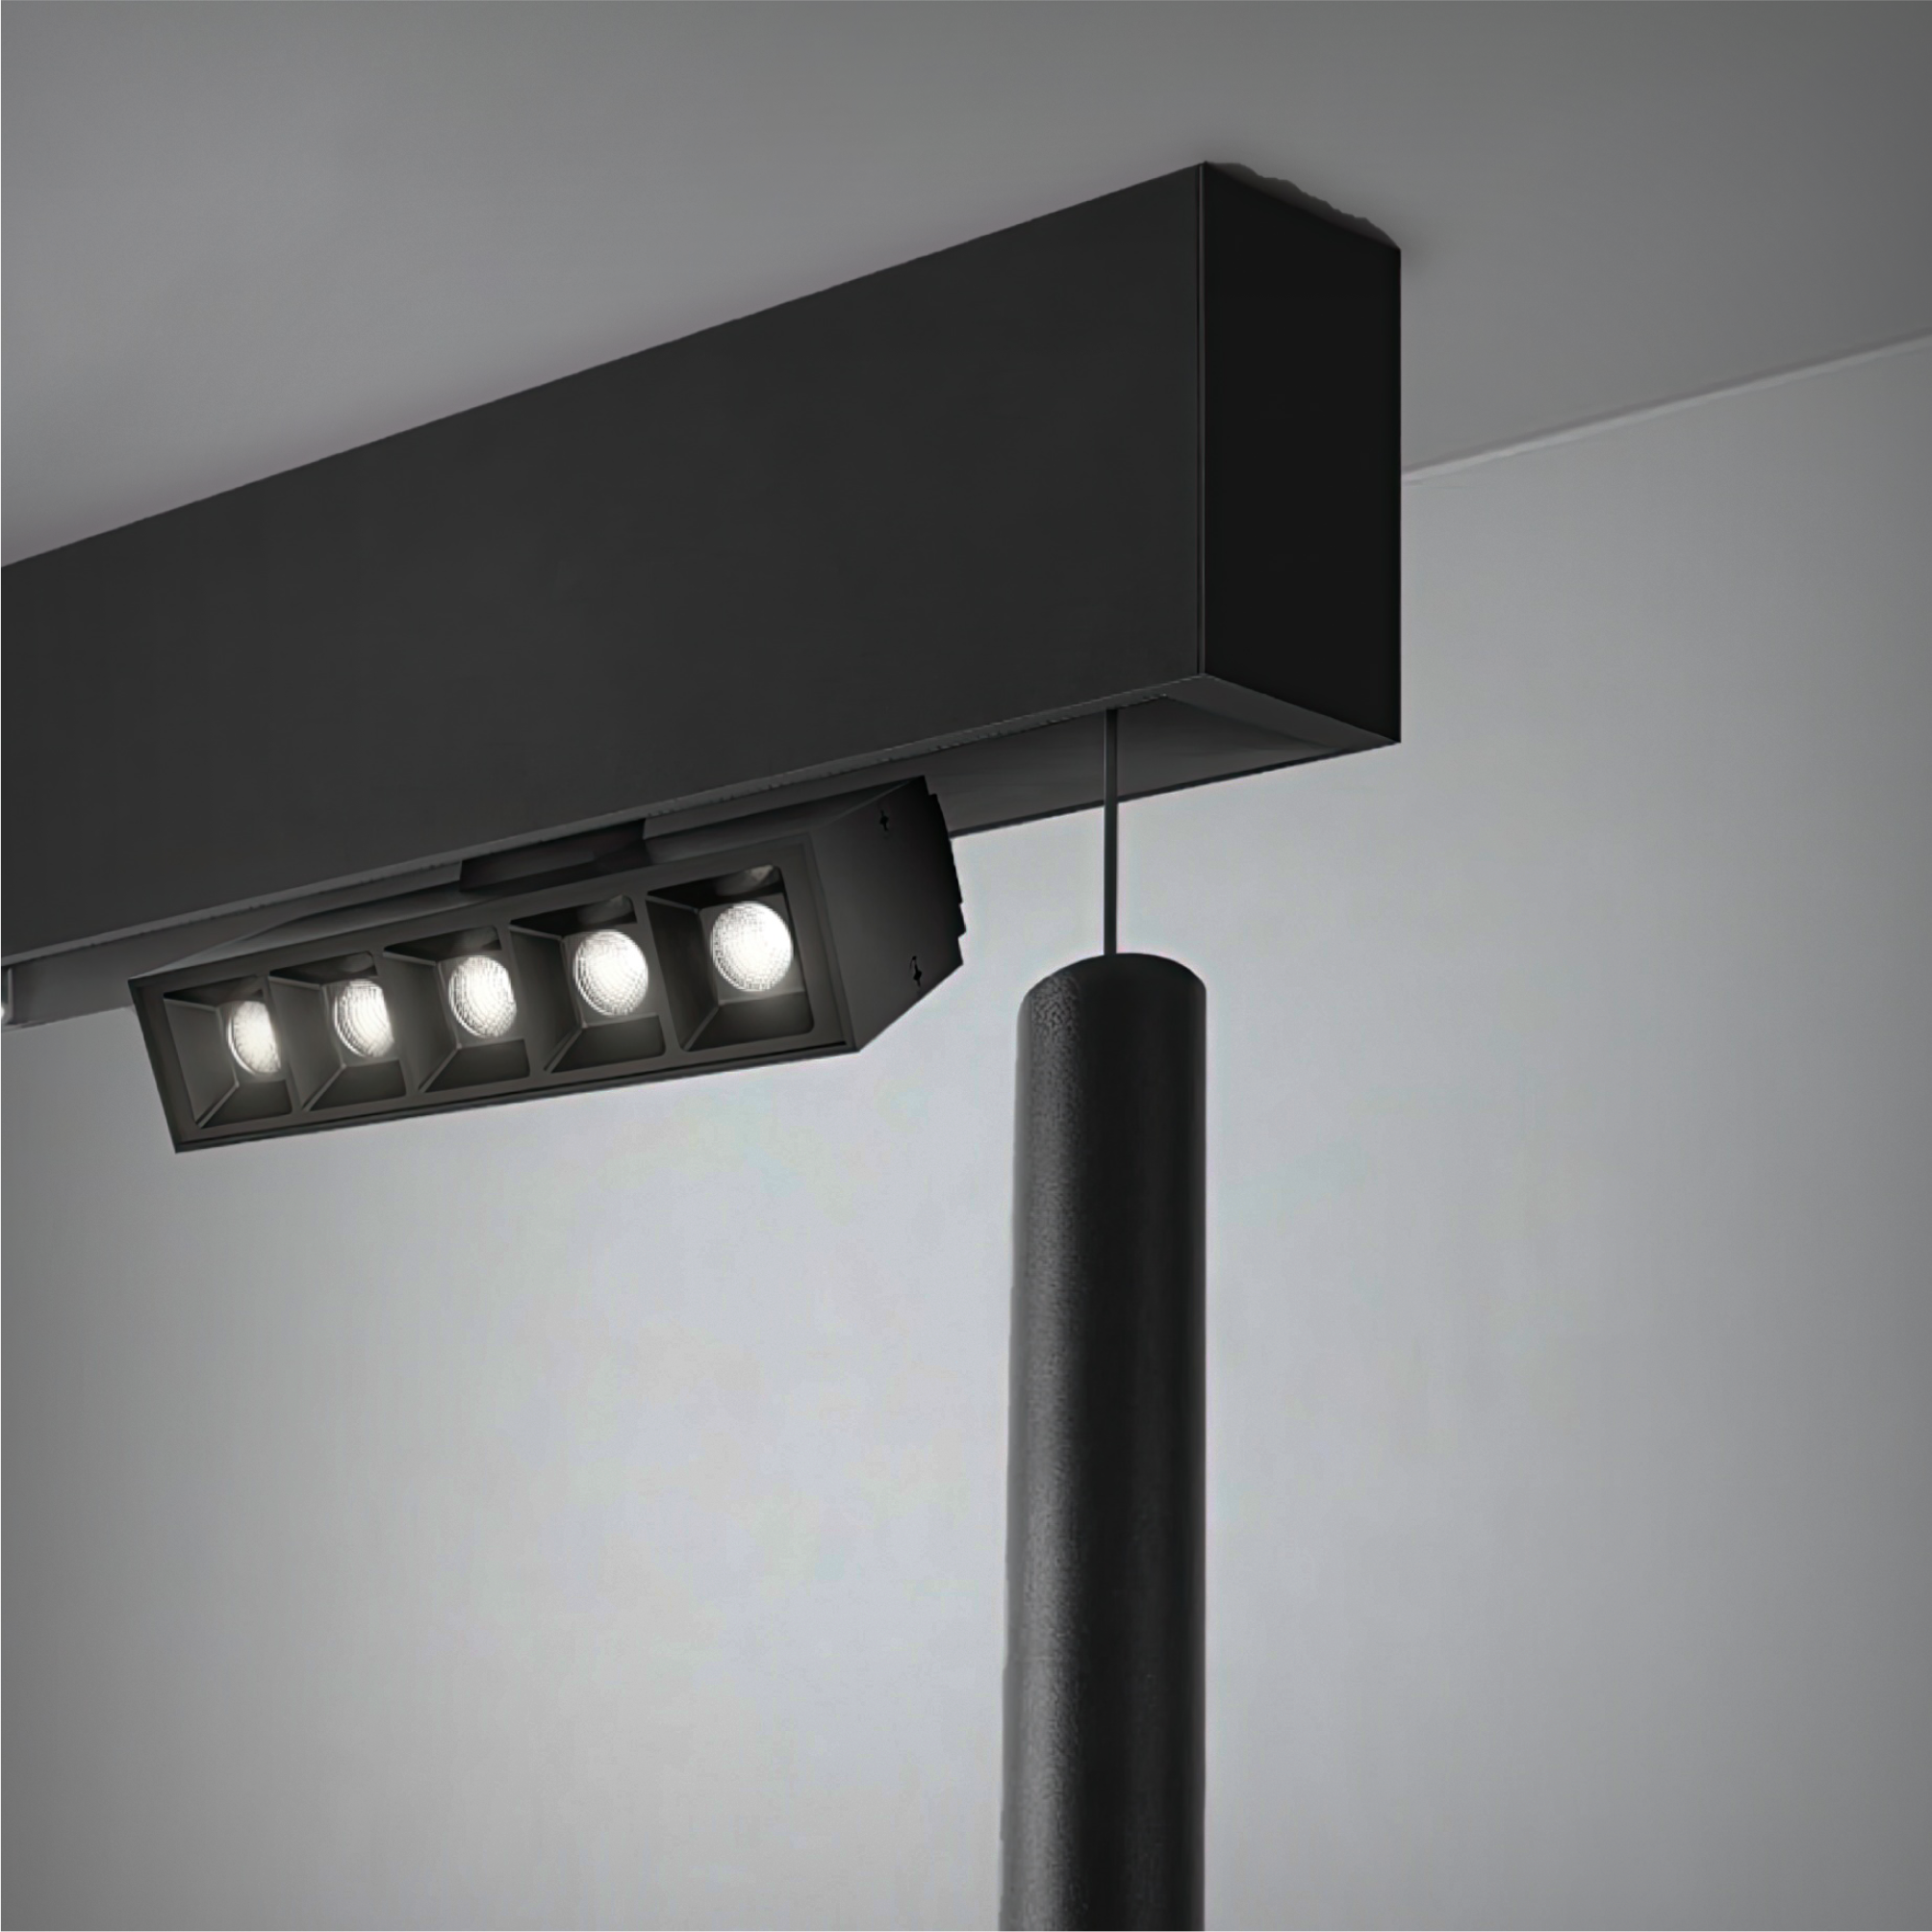 LED Linear Surface Mount Modular Lighting System with a 1.5-Inch width